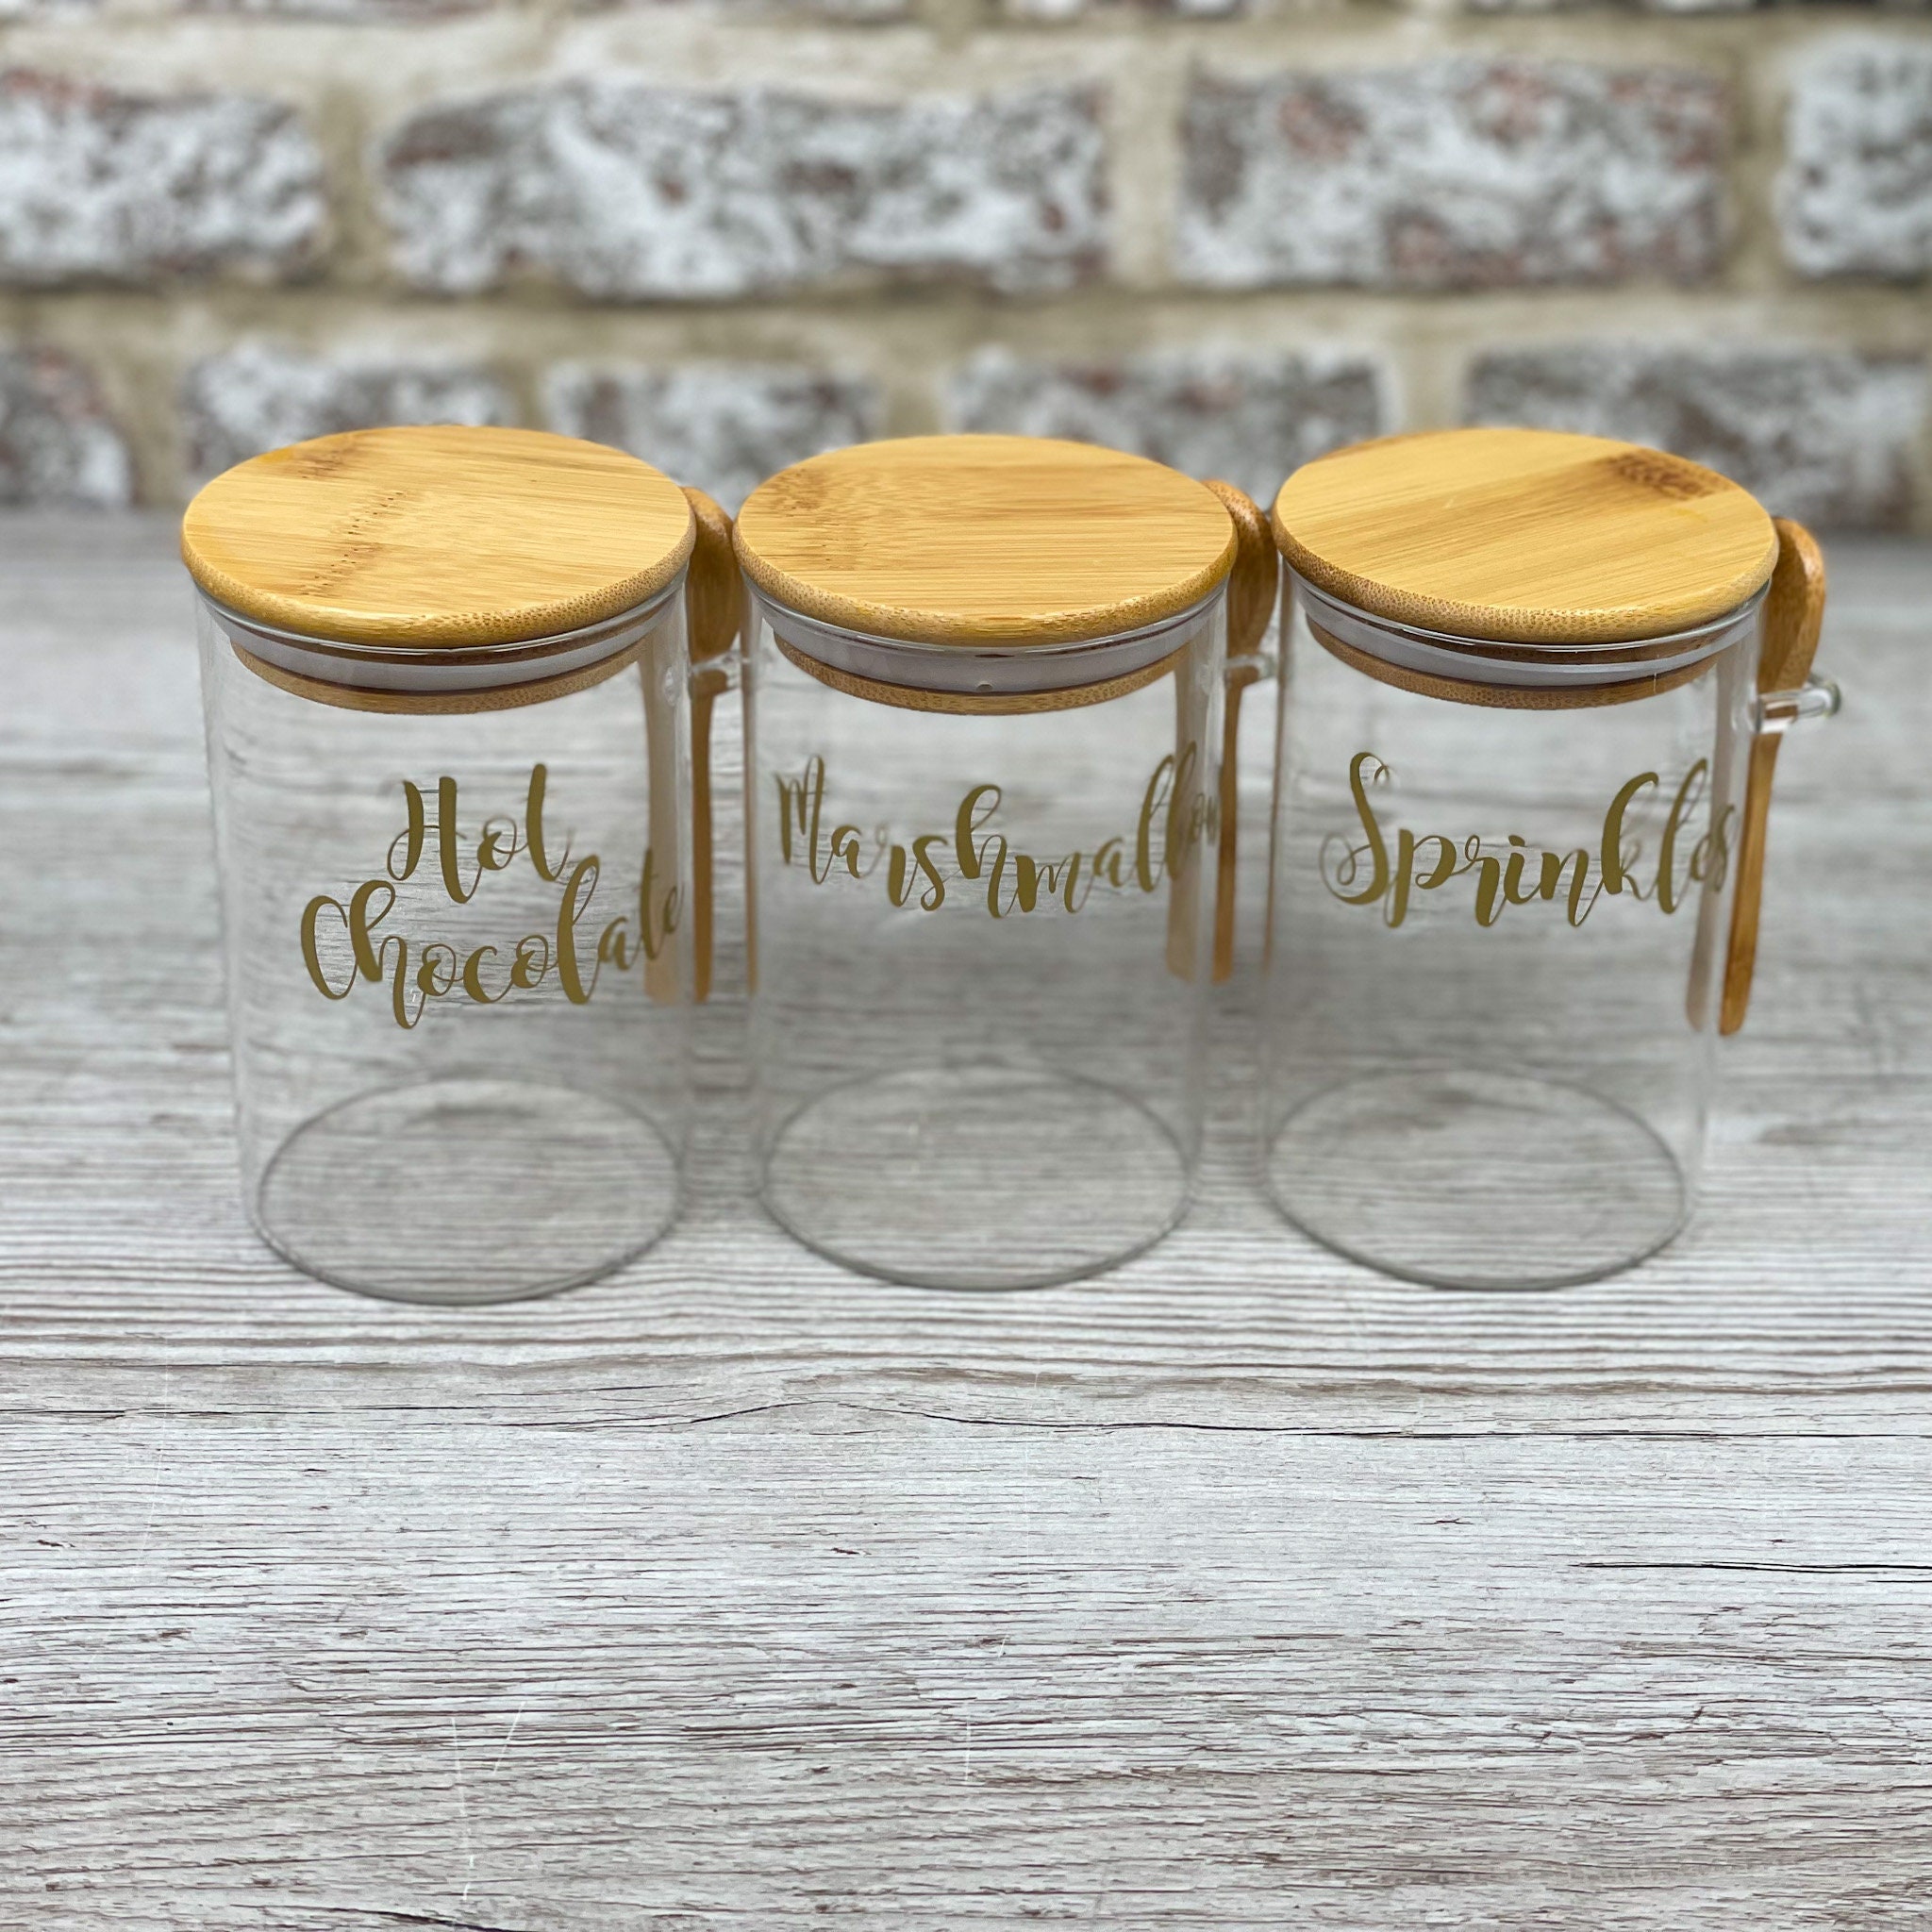 Airtight Glass Jars with Bamboo Lids & Bamboo Spoons - Decorative